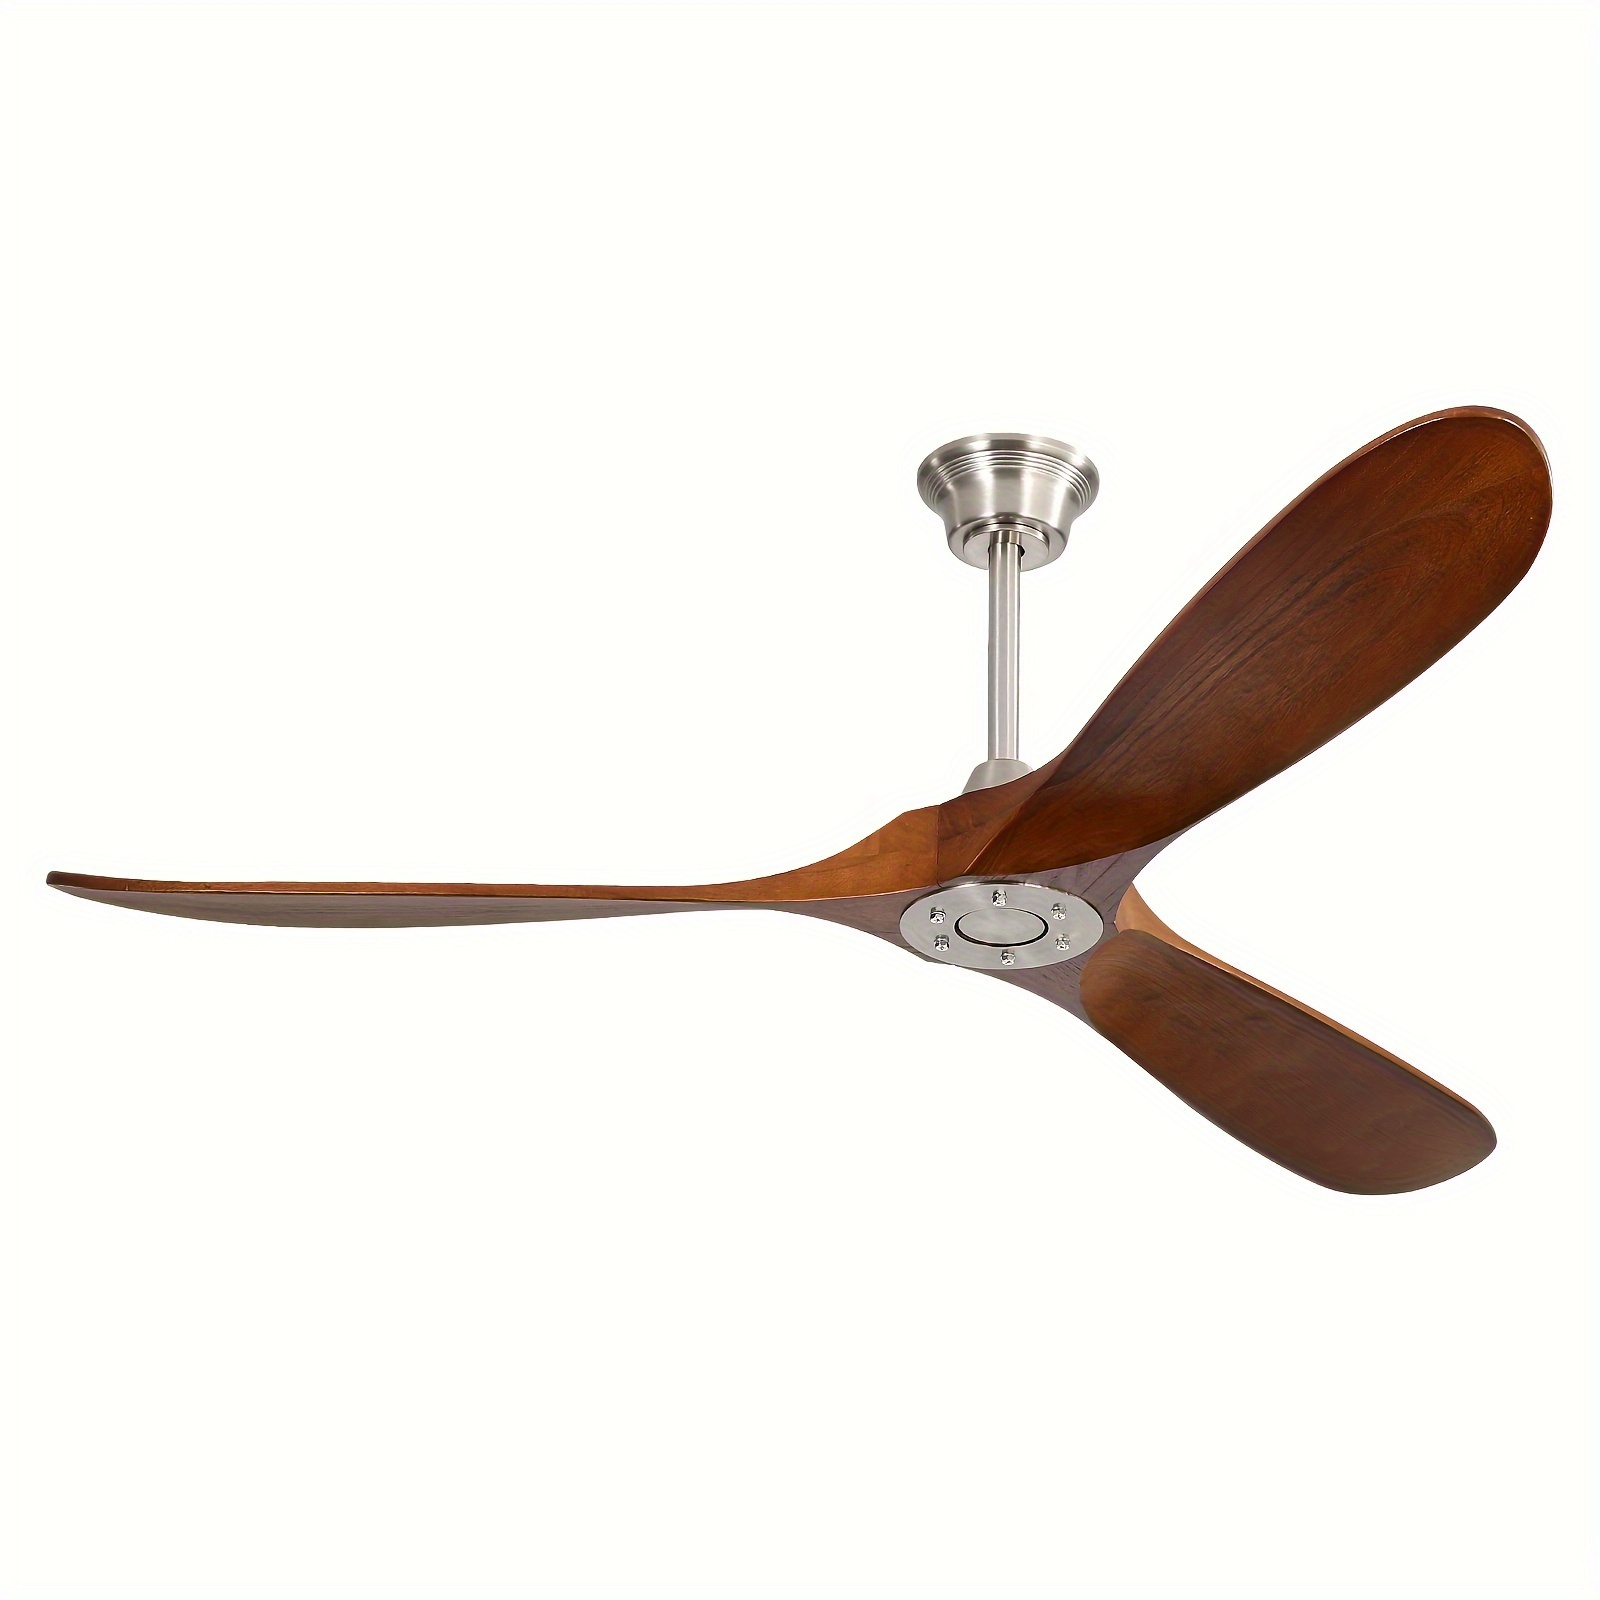 

Sofucor 60 Inch Ceiling Fan No Light, 3 Blade Ceiling Fan, Indoor Outdoor Ceiling Fan With Remote Control, Noiseless Reversible Dc Motor With 6 Speed 3 Timer For Bedroom/living Room/farmhouse/porch